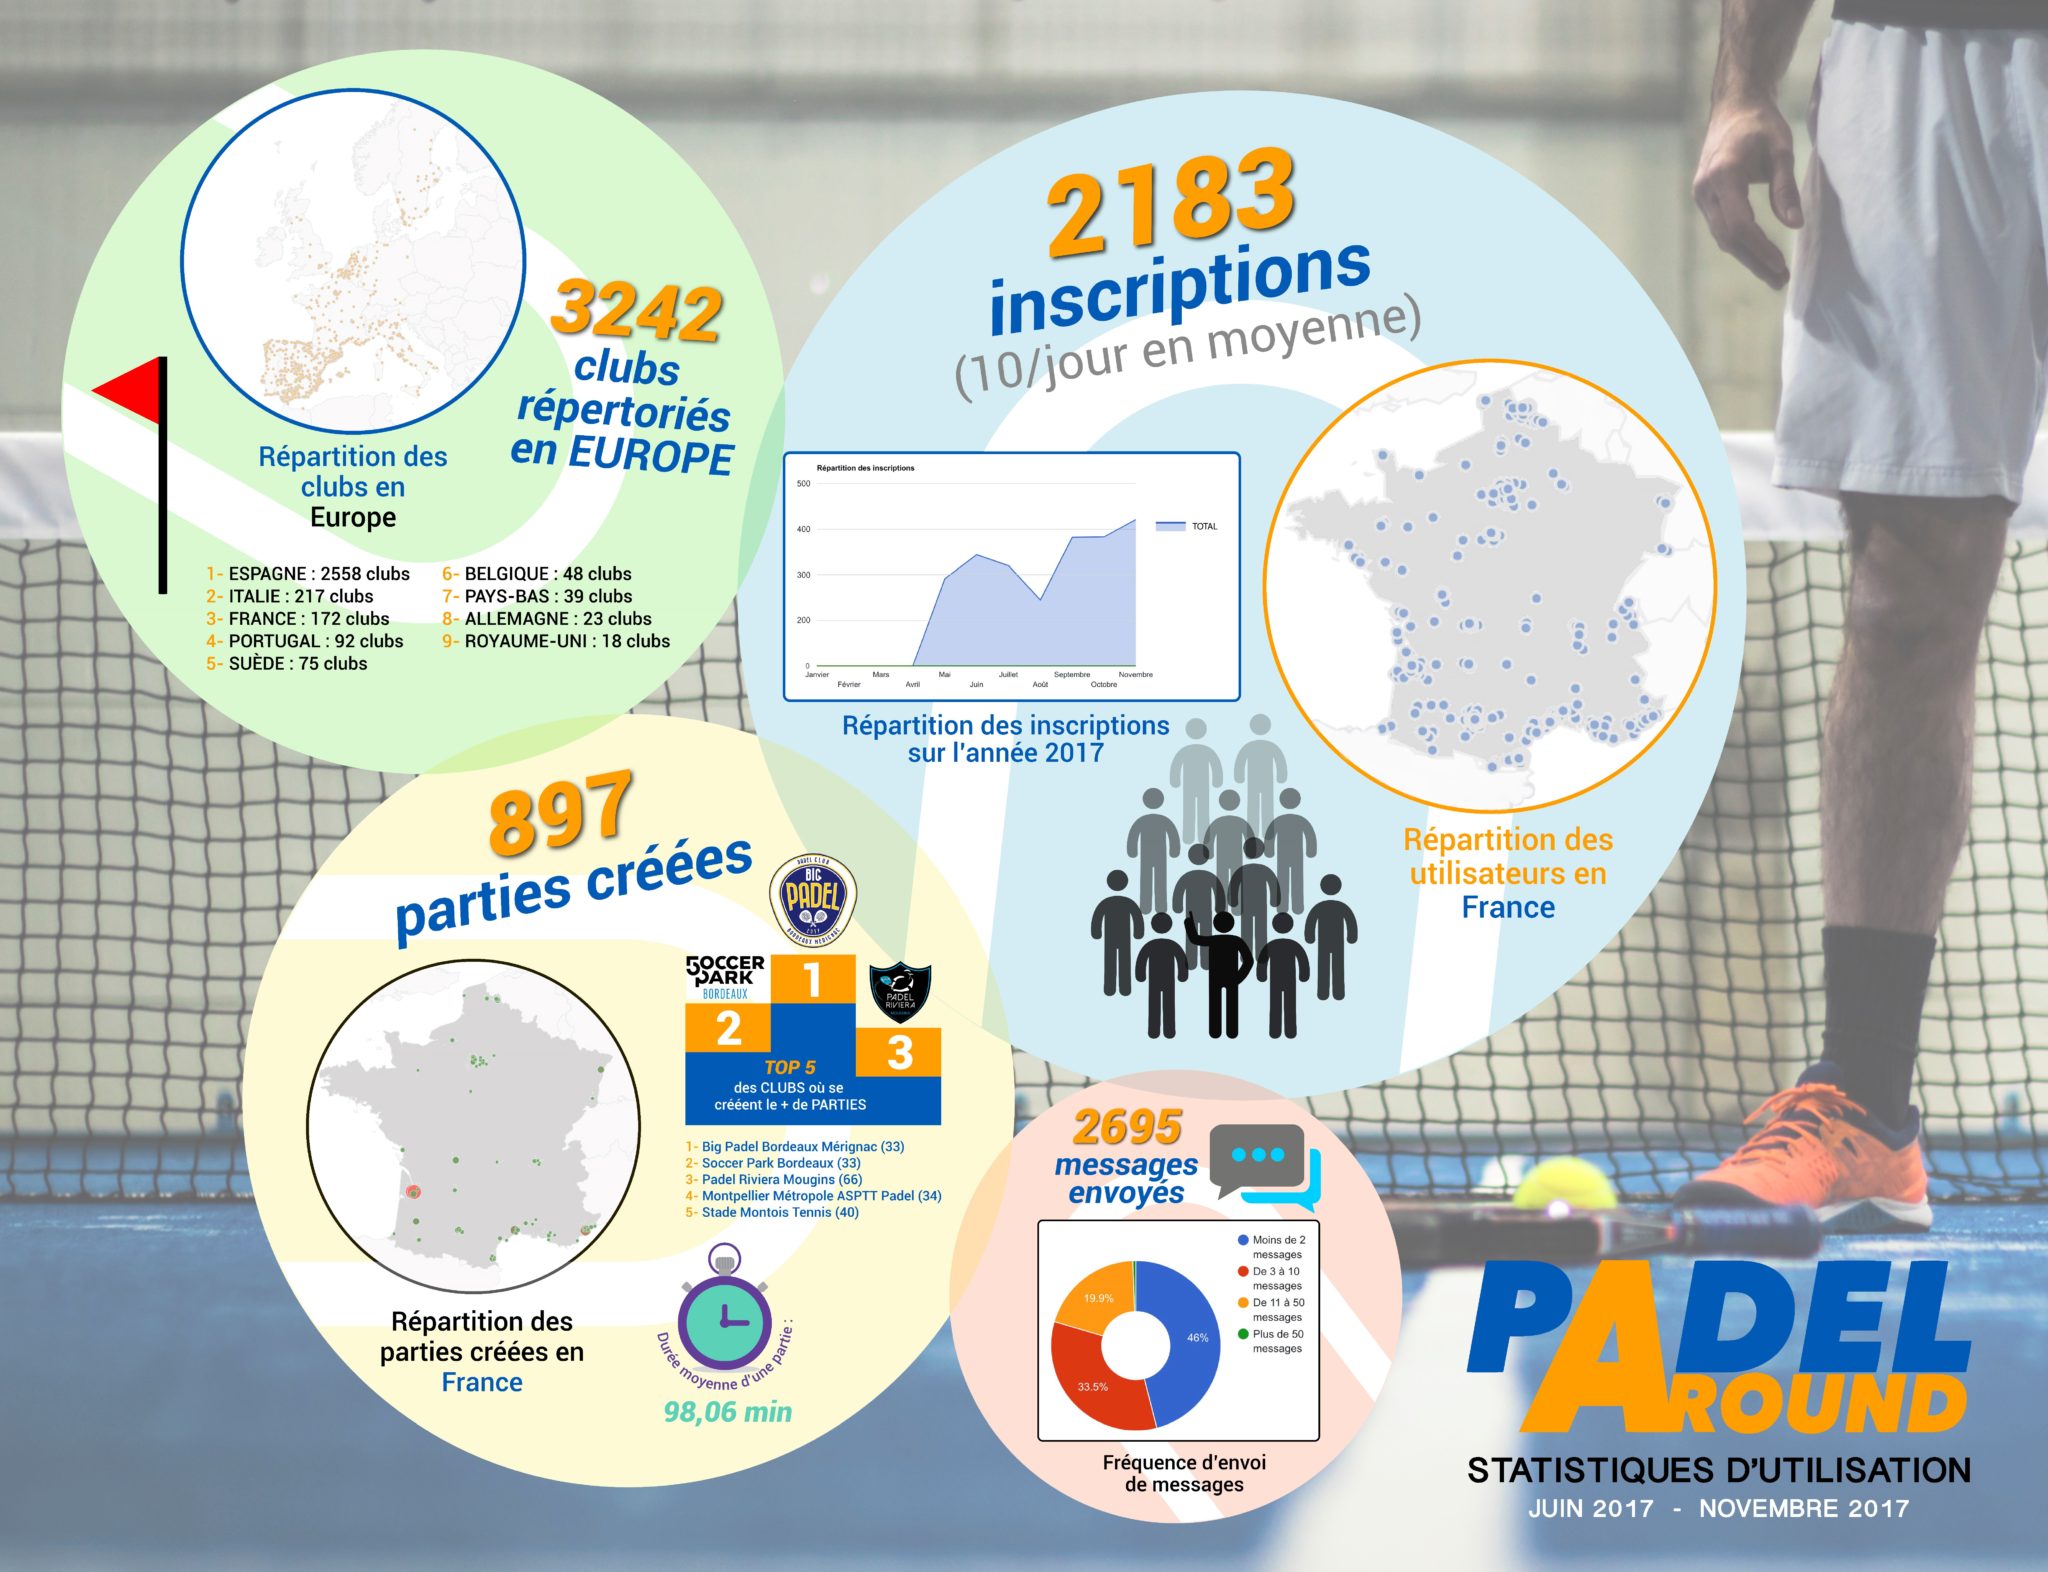 Padel Around launched at full throttle